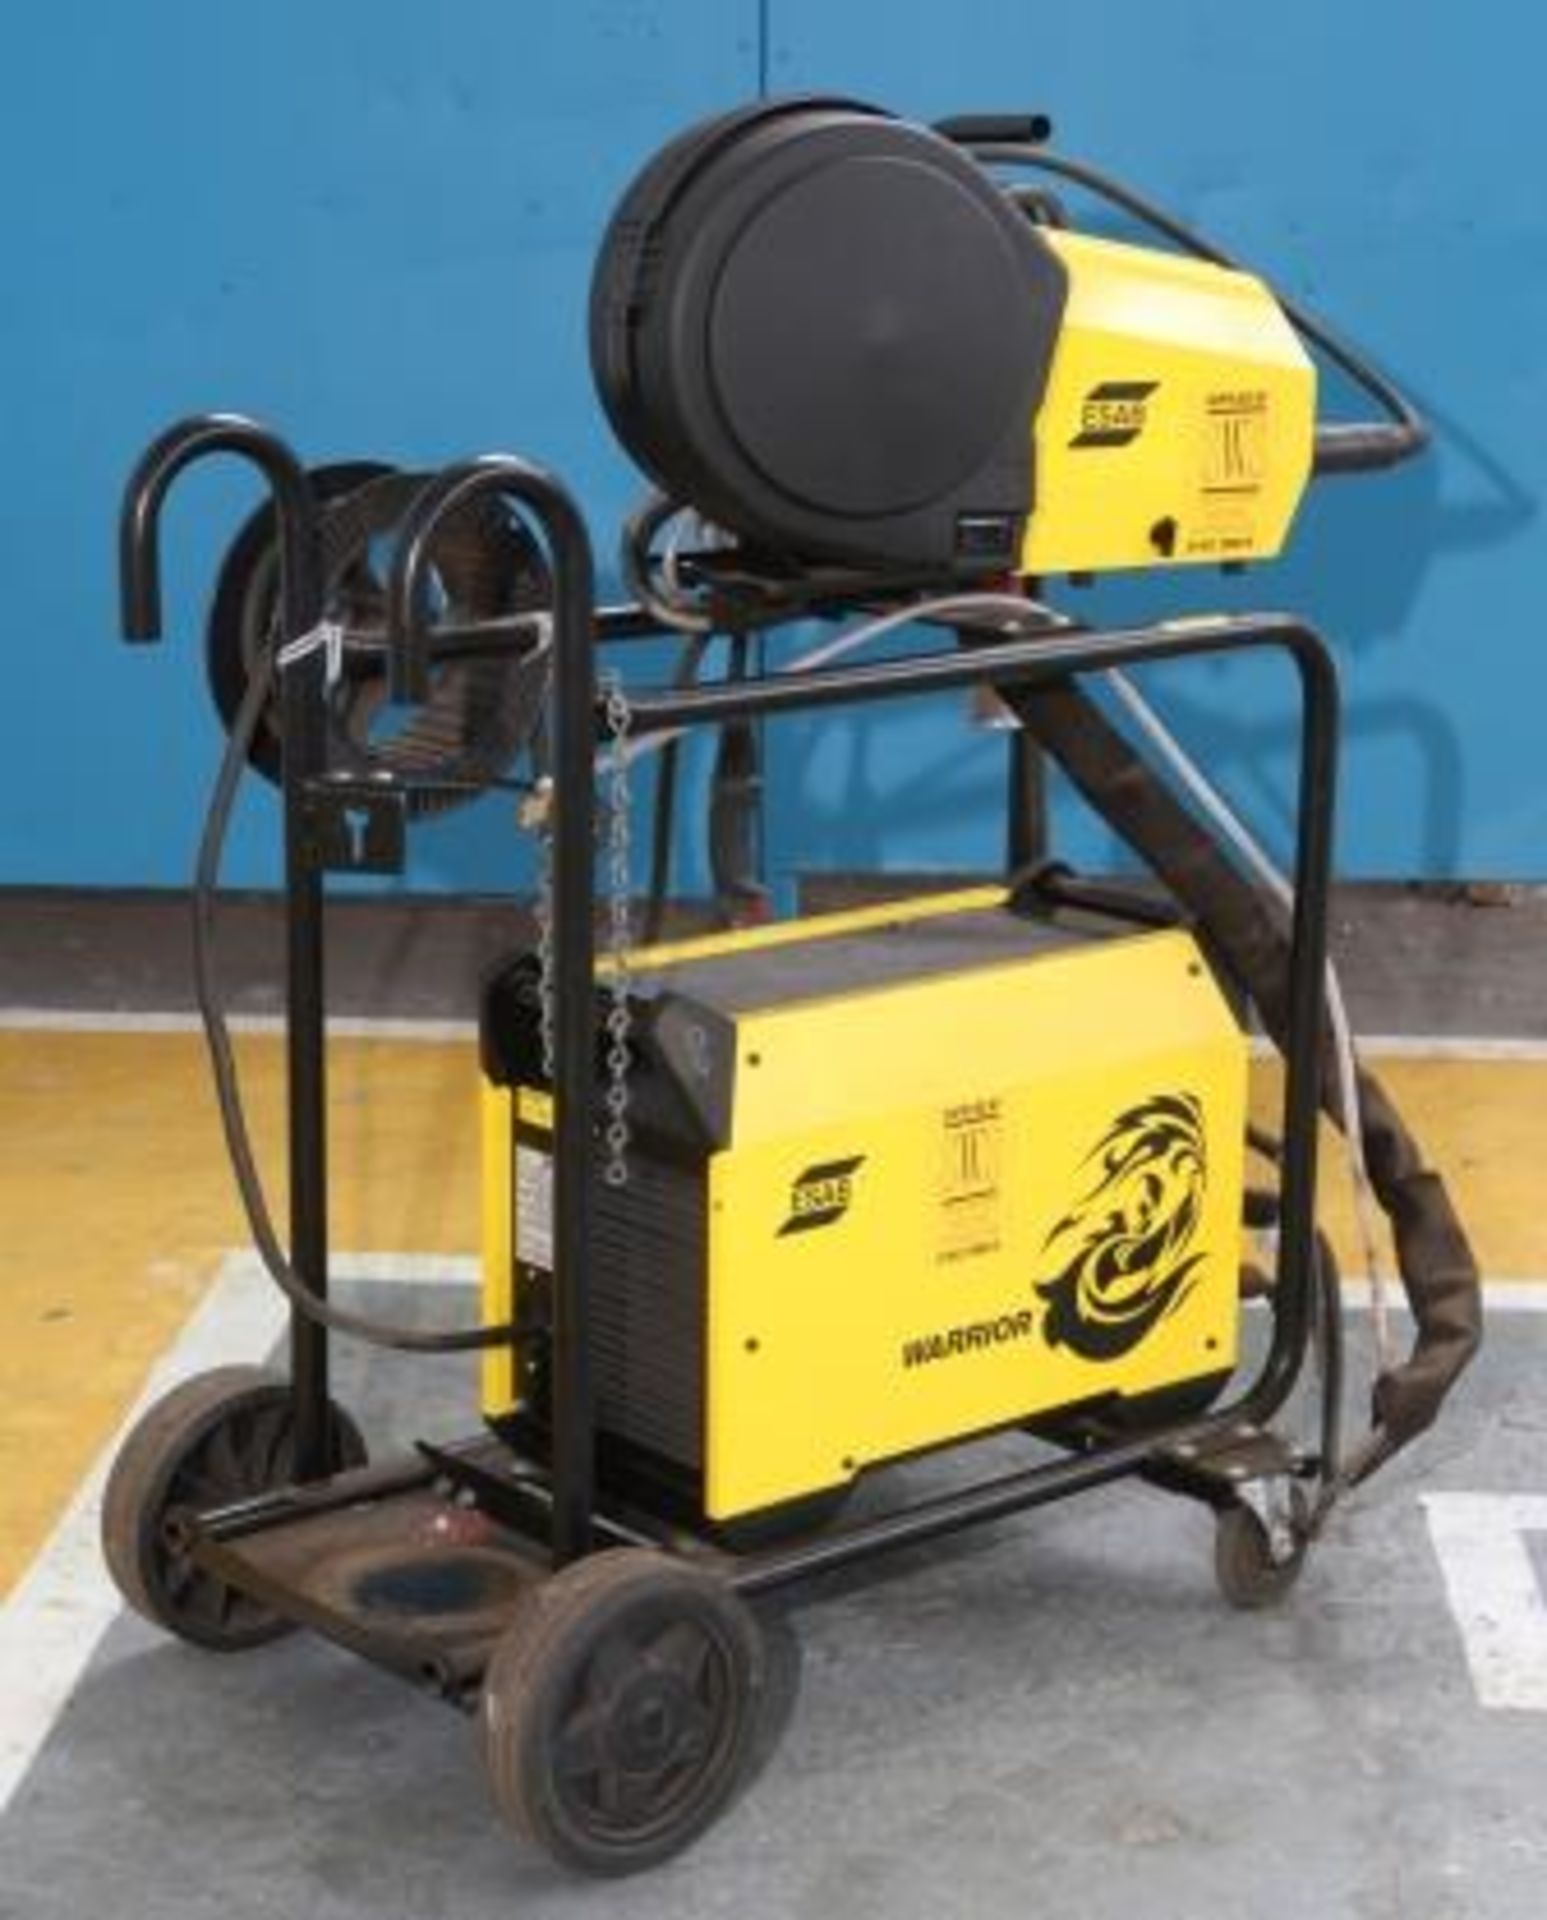 ESAB Warrior 400i CC/CV Weld Set Complete With Warrior Feed 304 - Image 6 of 6